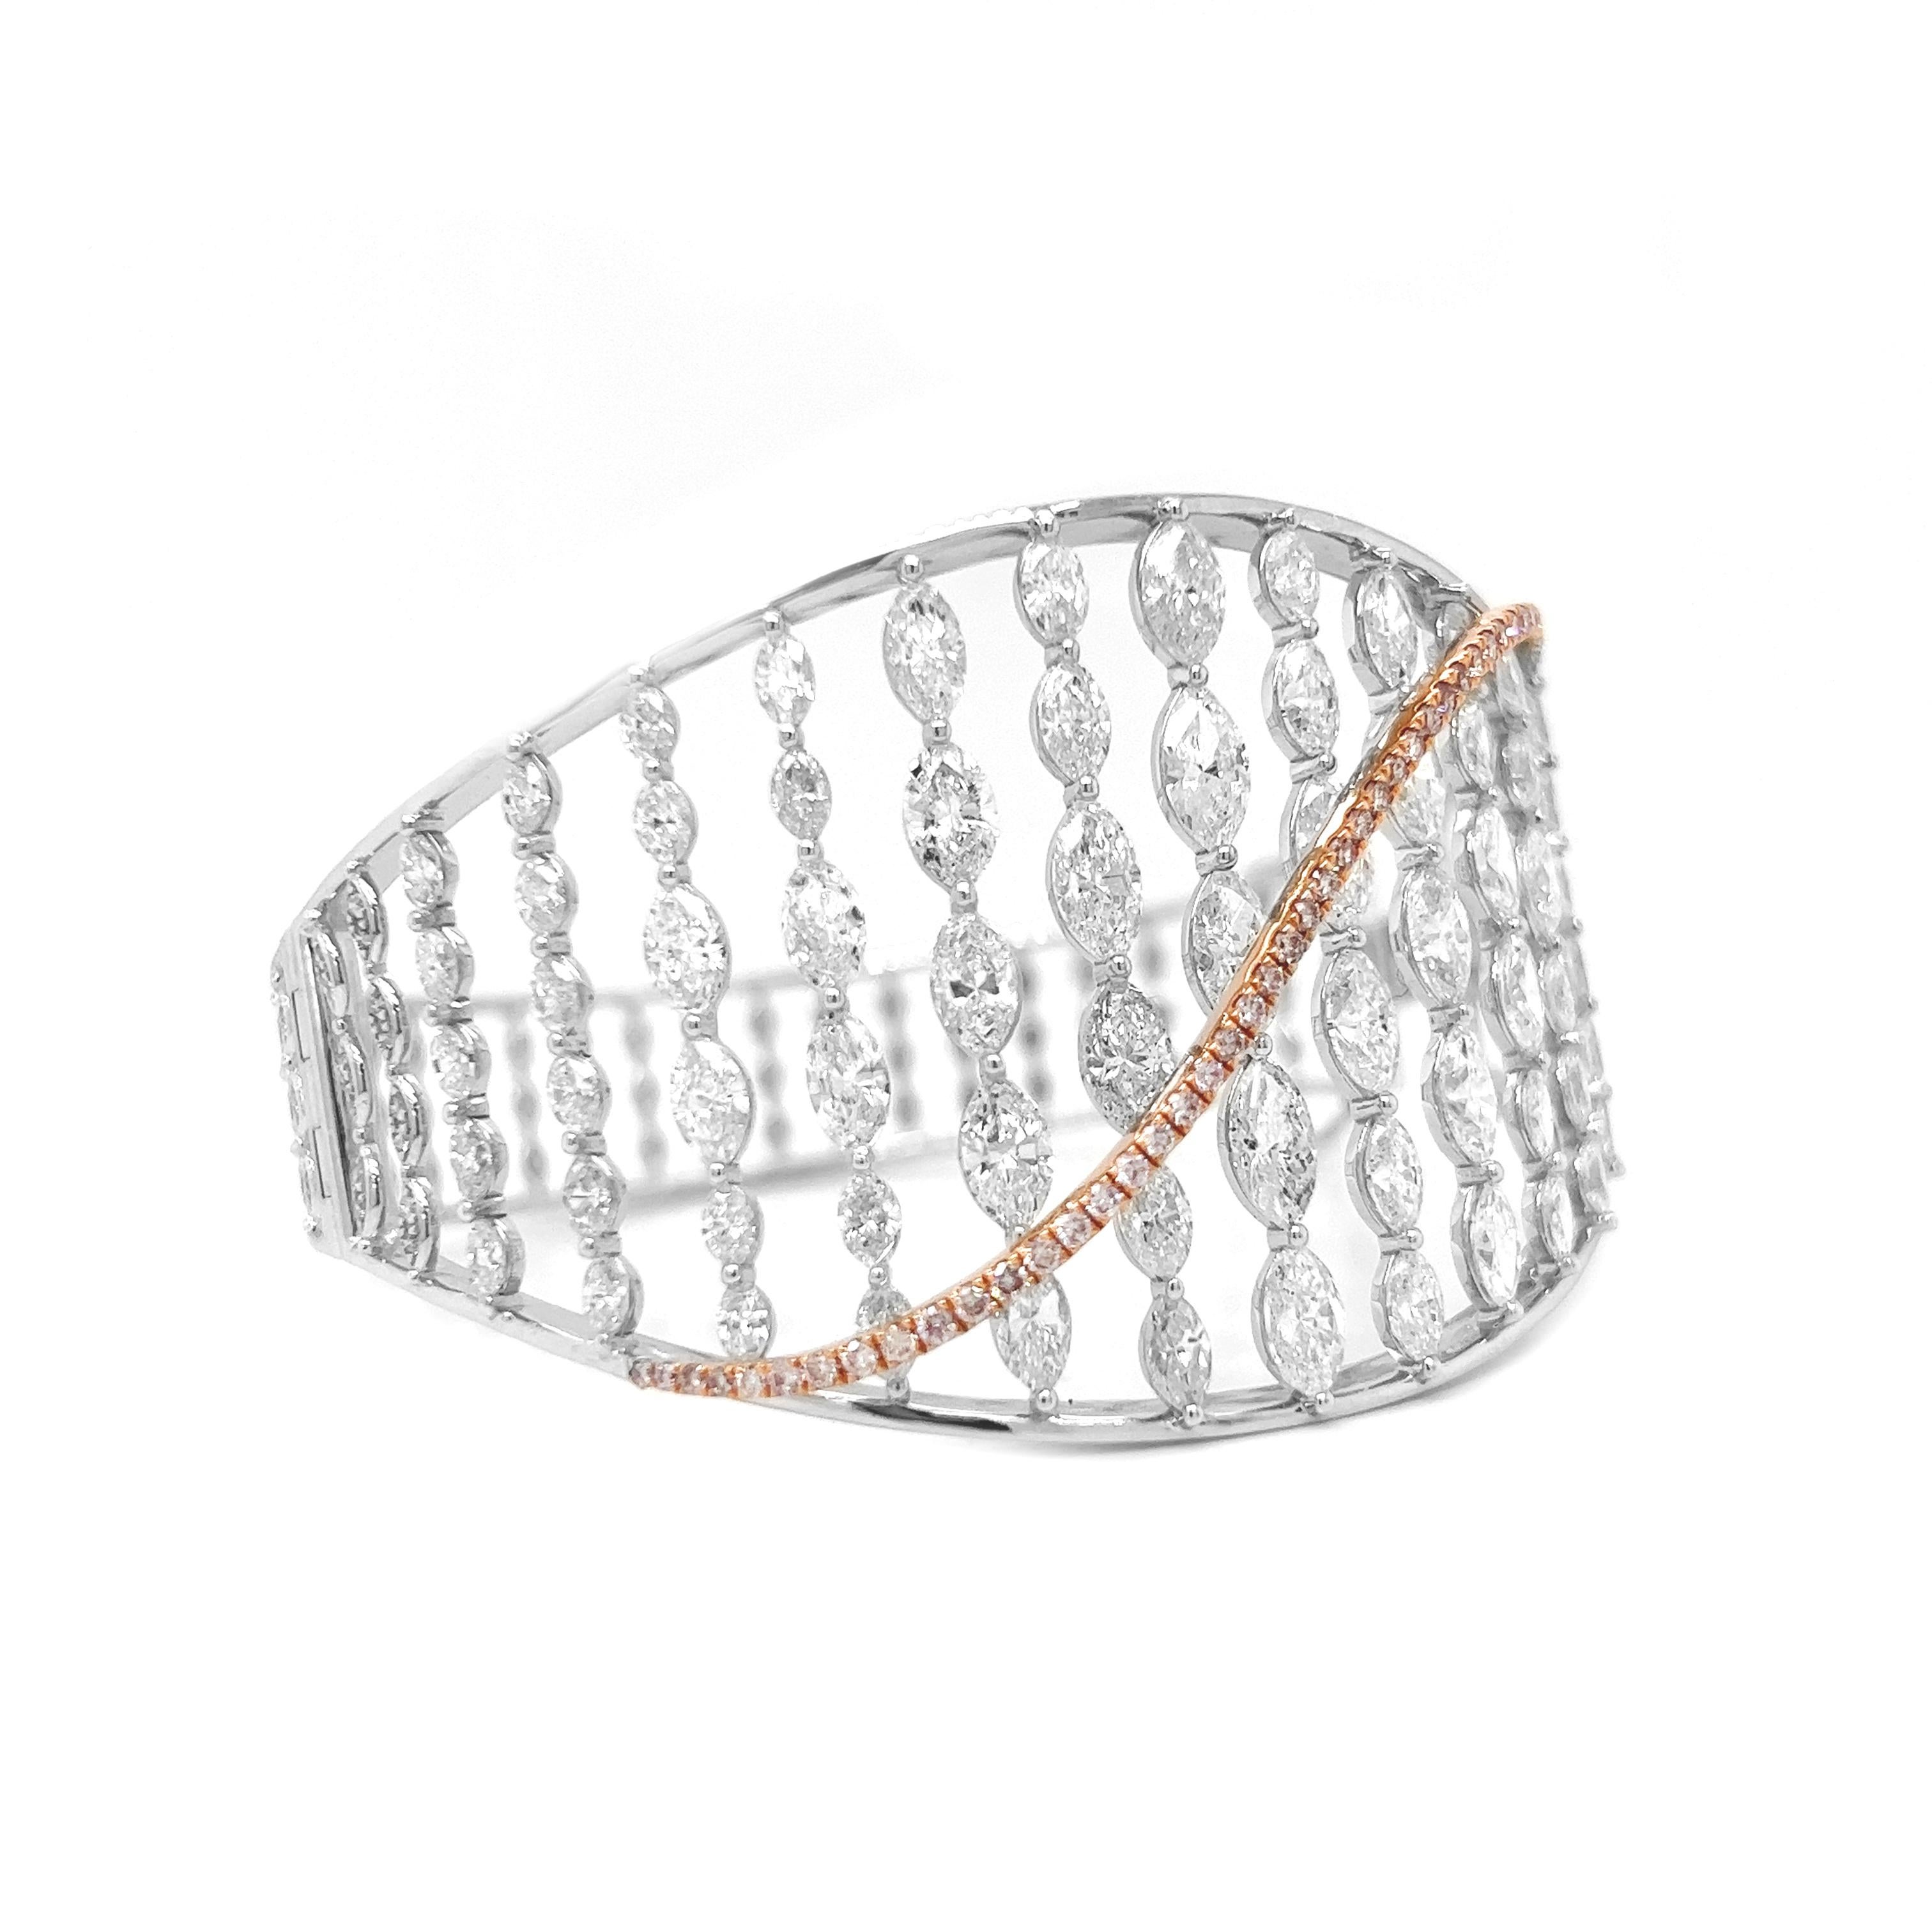 16.46 Carat Natural Mined Marquise/Round Fancy Yellow Pink Diamond Bangle 18KT

Elevate your style with the unmatched beauty of this 16.46 Carat Natural Mined Marquise/Round Fancy Yellow Pink Diamond Bangle in 18KT gold. This bangle is a true